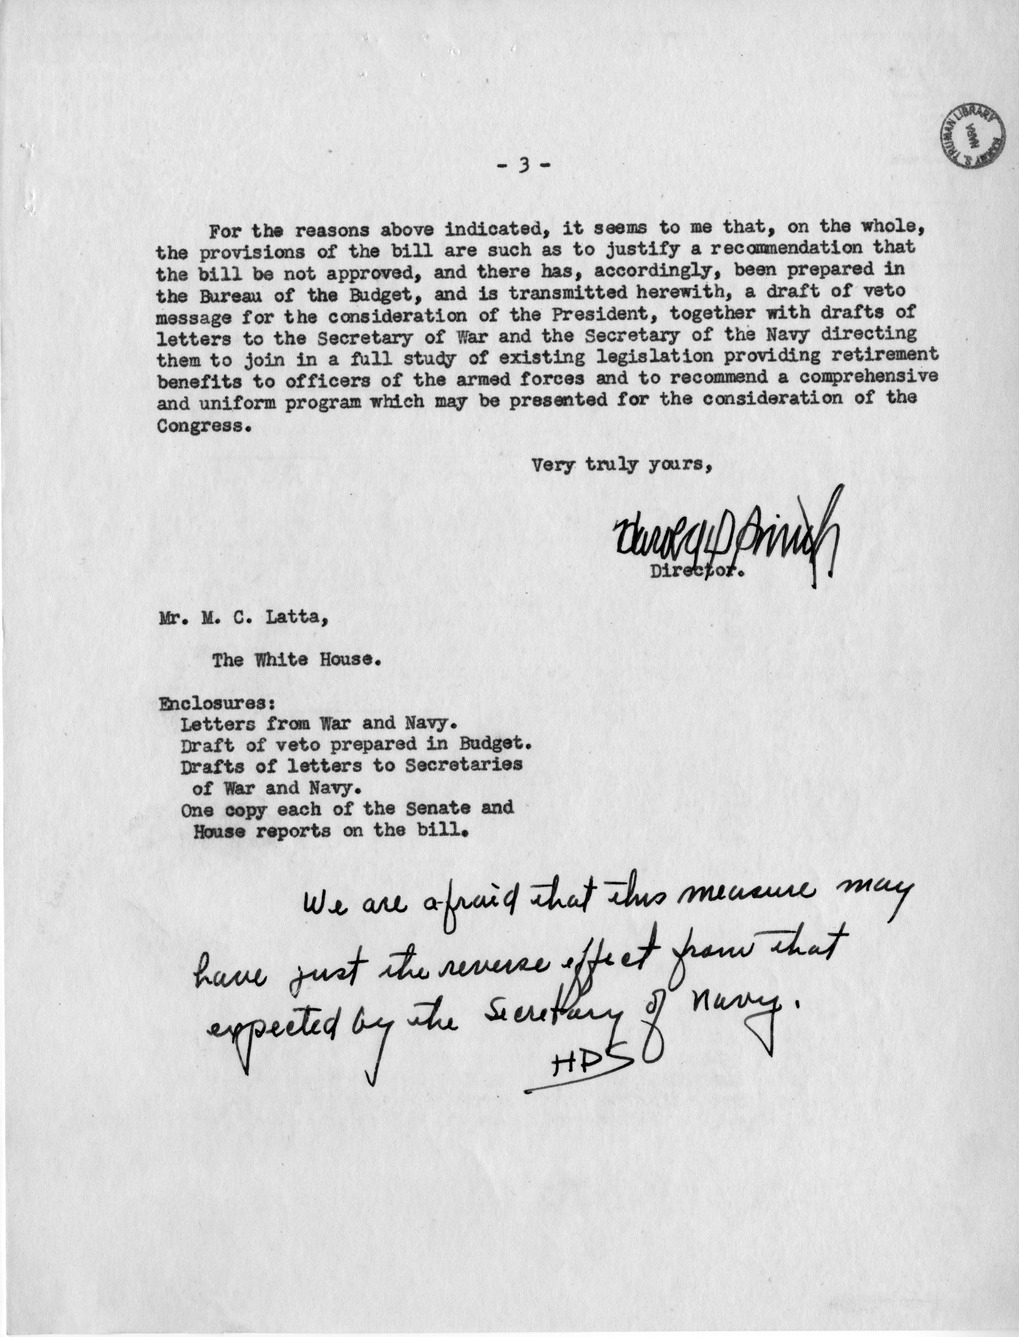 Memorandum from Harold D. Smith to M. C. Latta, S. 1405, To Authorize the President to Retire Certain Officers and Enlisted Men of the Navy, Marine Corps, and Coast Guard, with Attachments